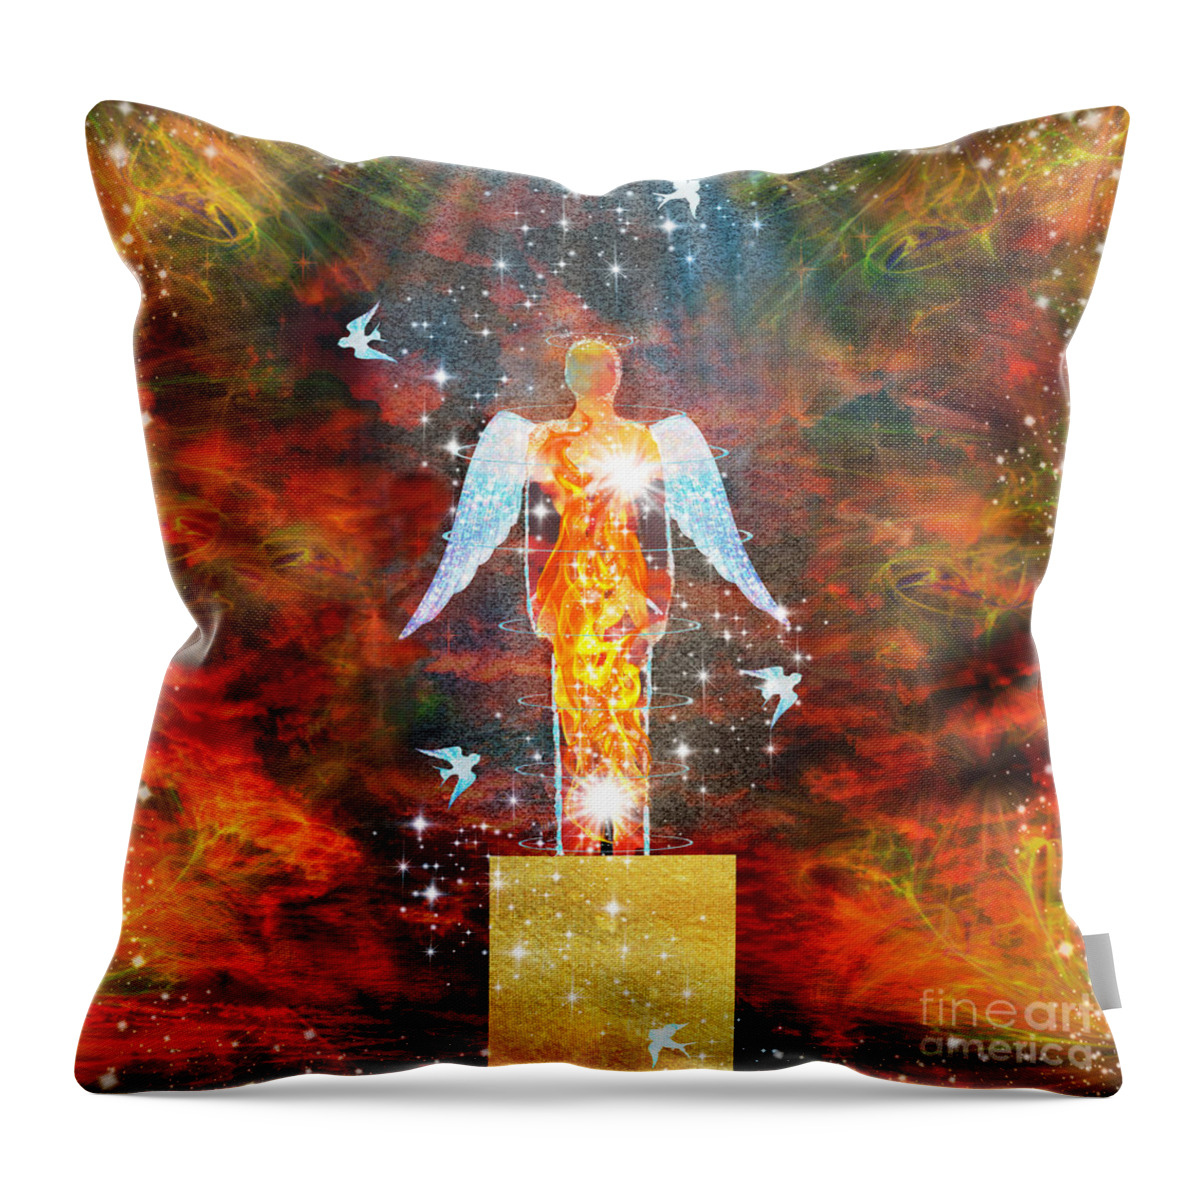 Light Throw Pillow featuring the mixed media Let Your Light Shine by Diamante Lavendar